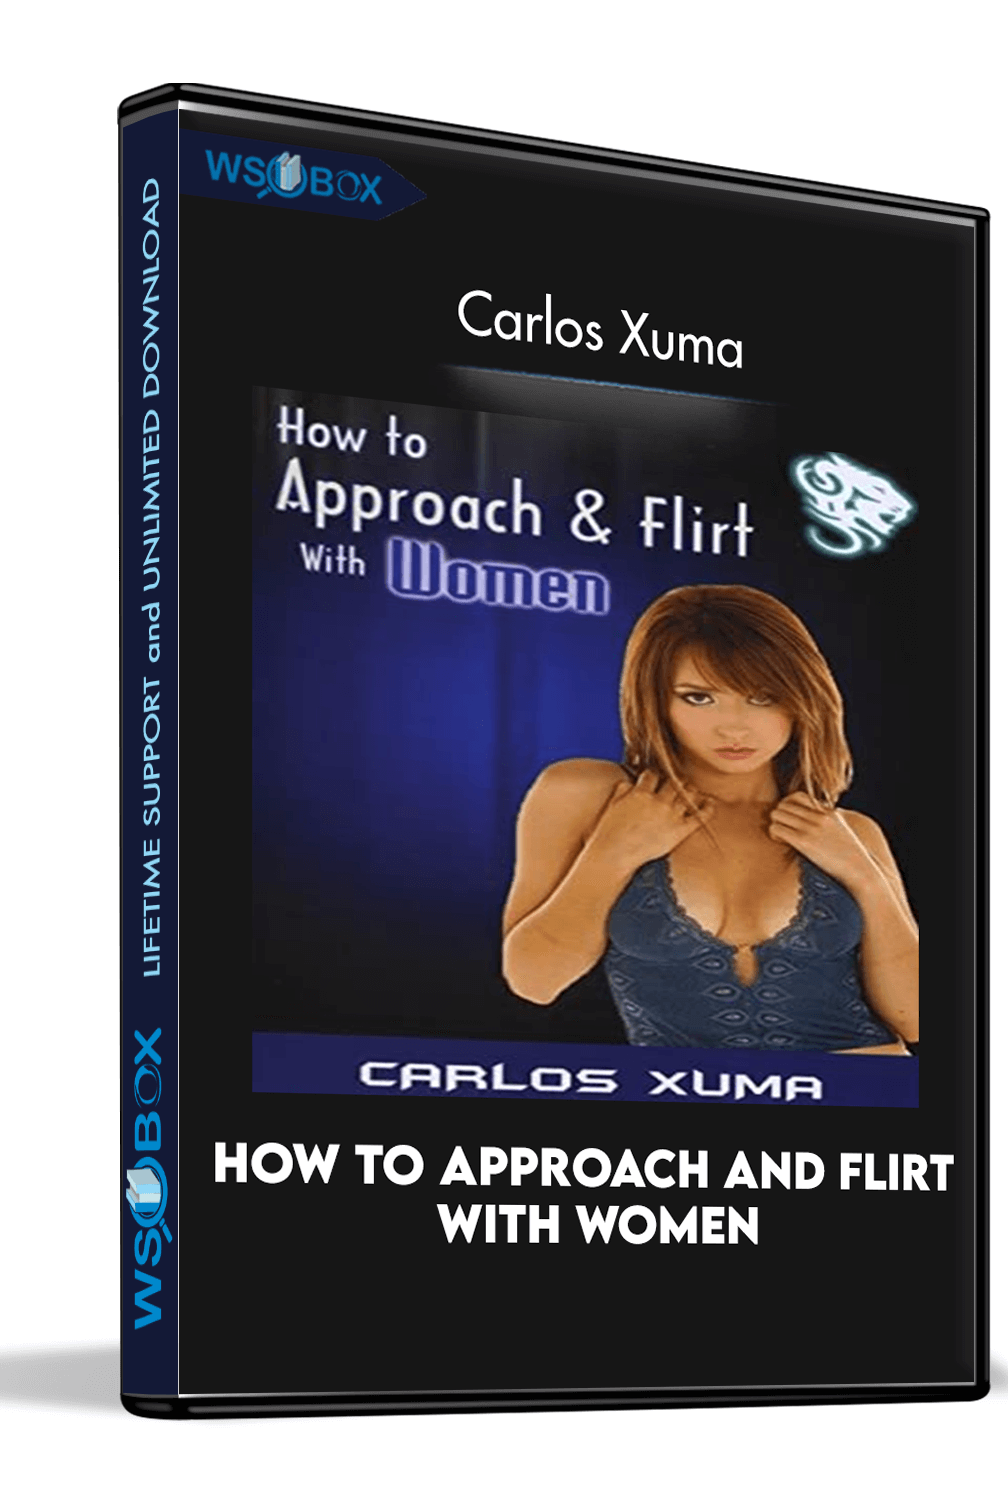 how-to-approach-and-flirt-with-women-carlos-xuma